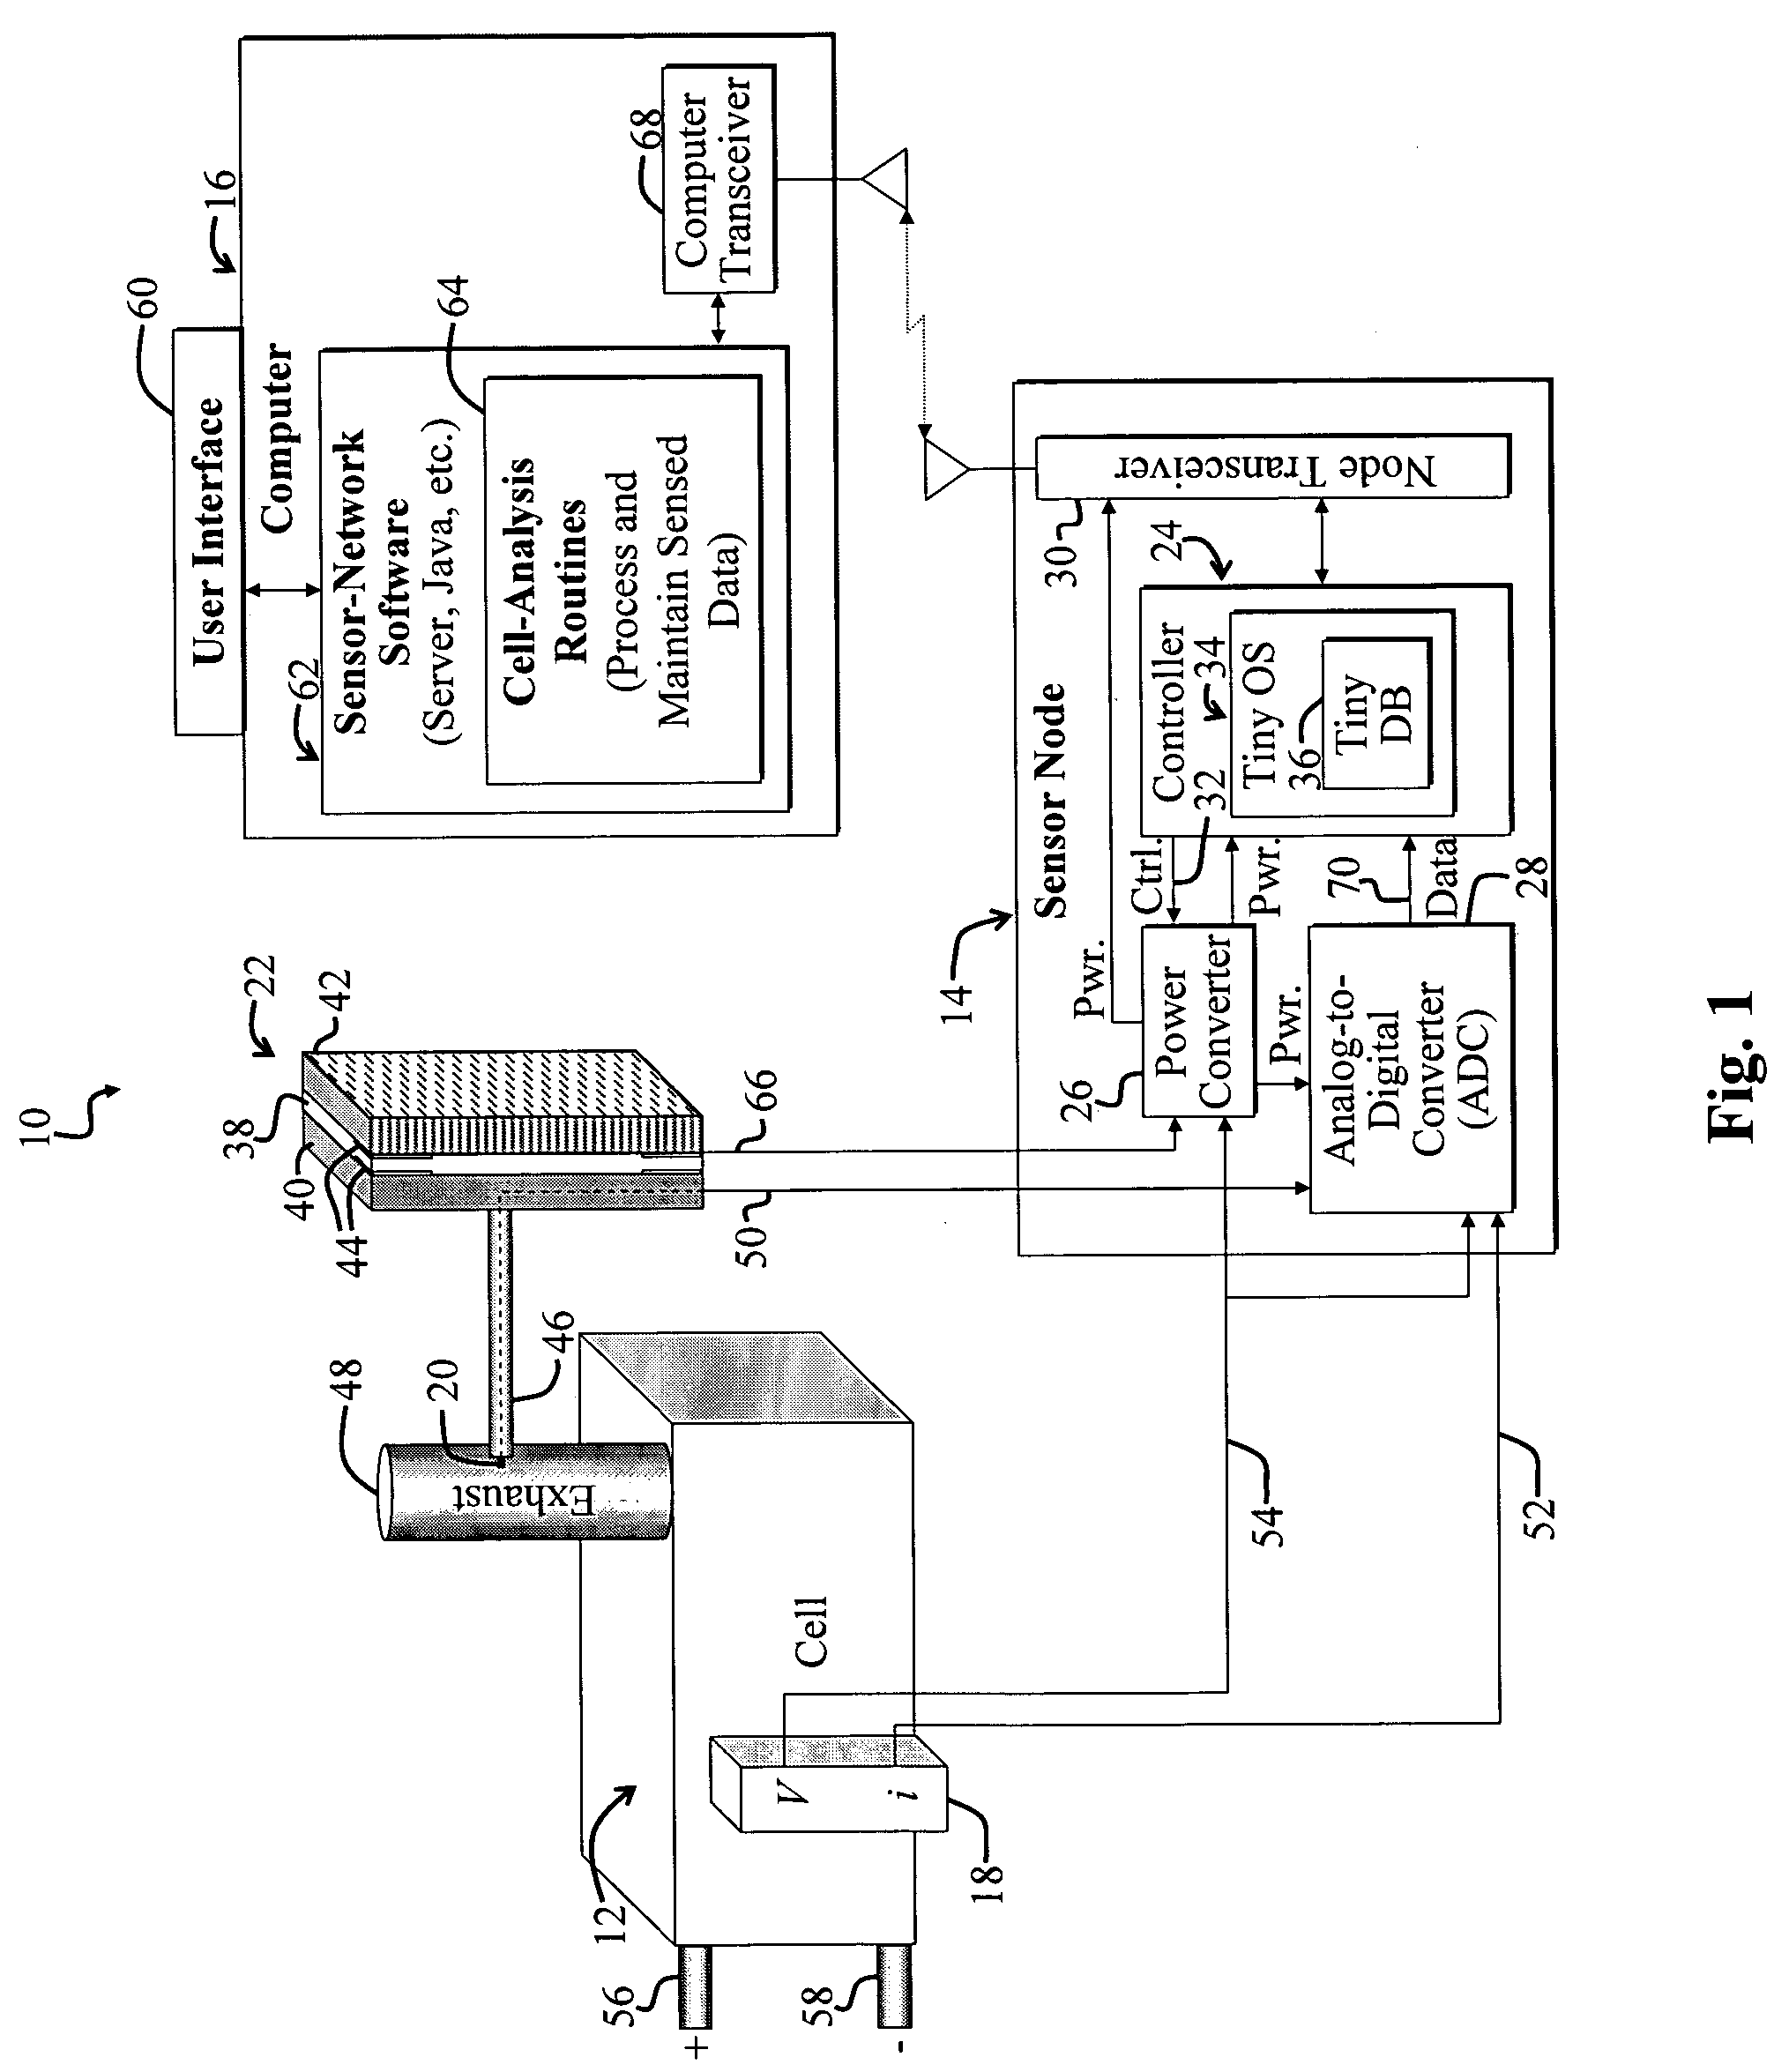 Wireless sensing node powered by energy conversion from sensed system